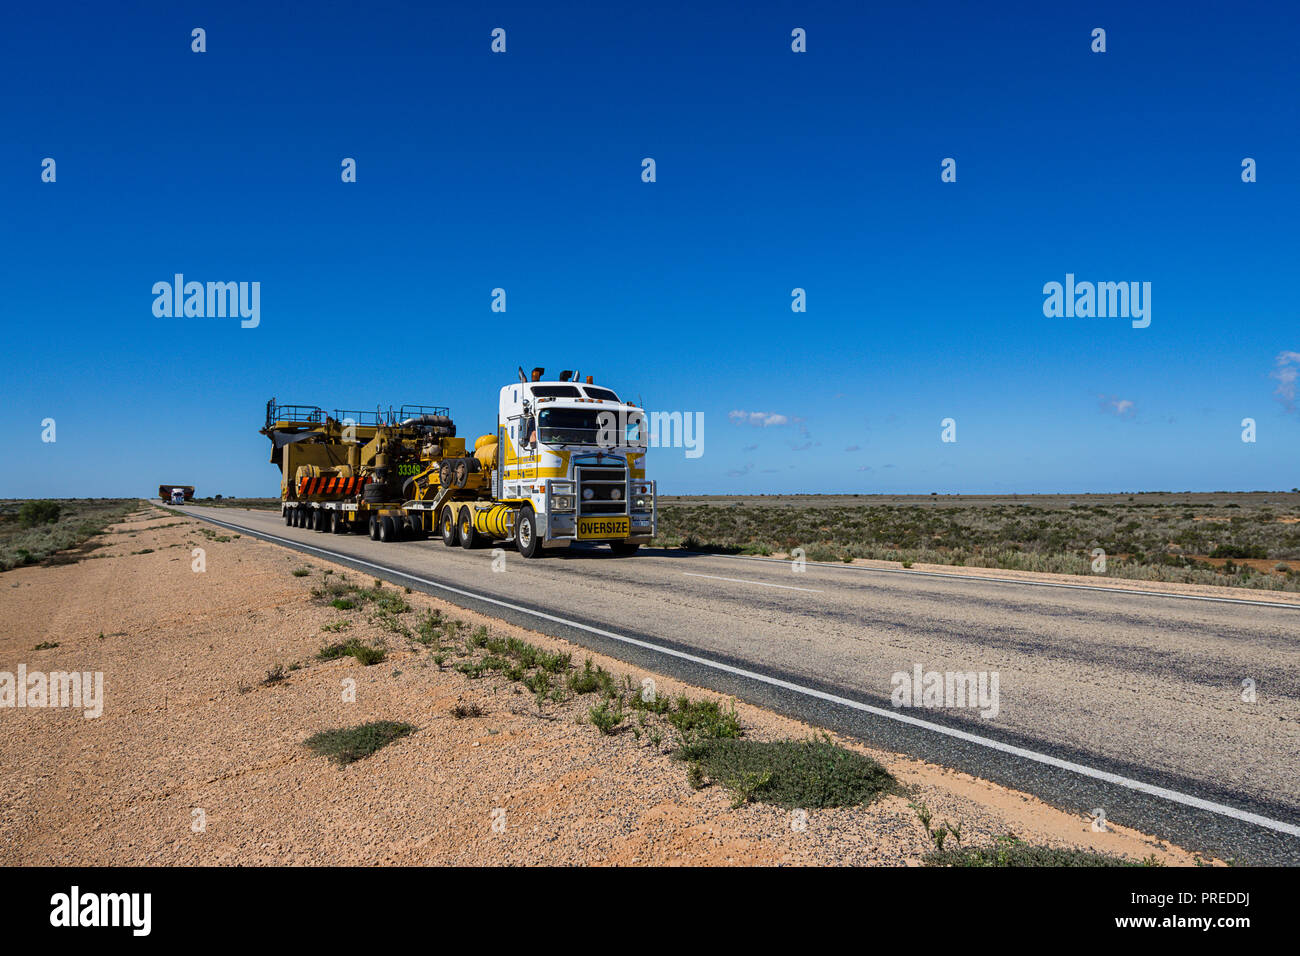 Road trains hauling mining equipment across the Nullabor Plain in South Australia Stock Photo